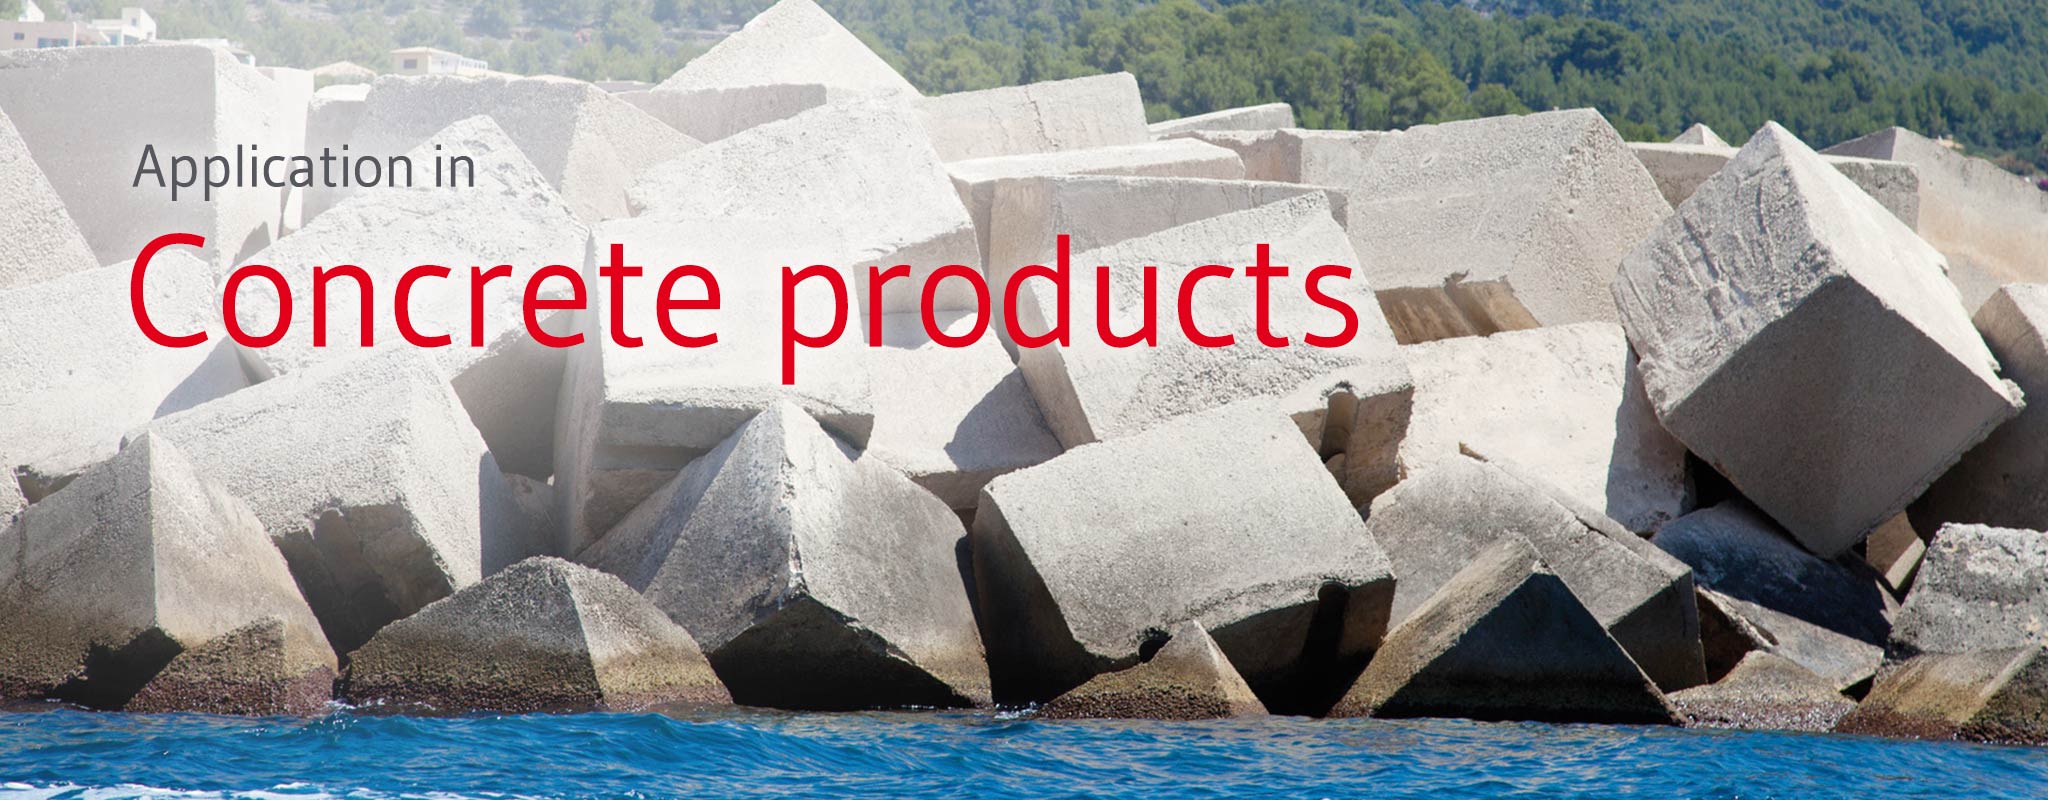 Use of secondary aggregates IBA in concrete products in the Netherlands